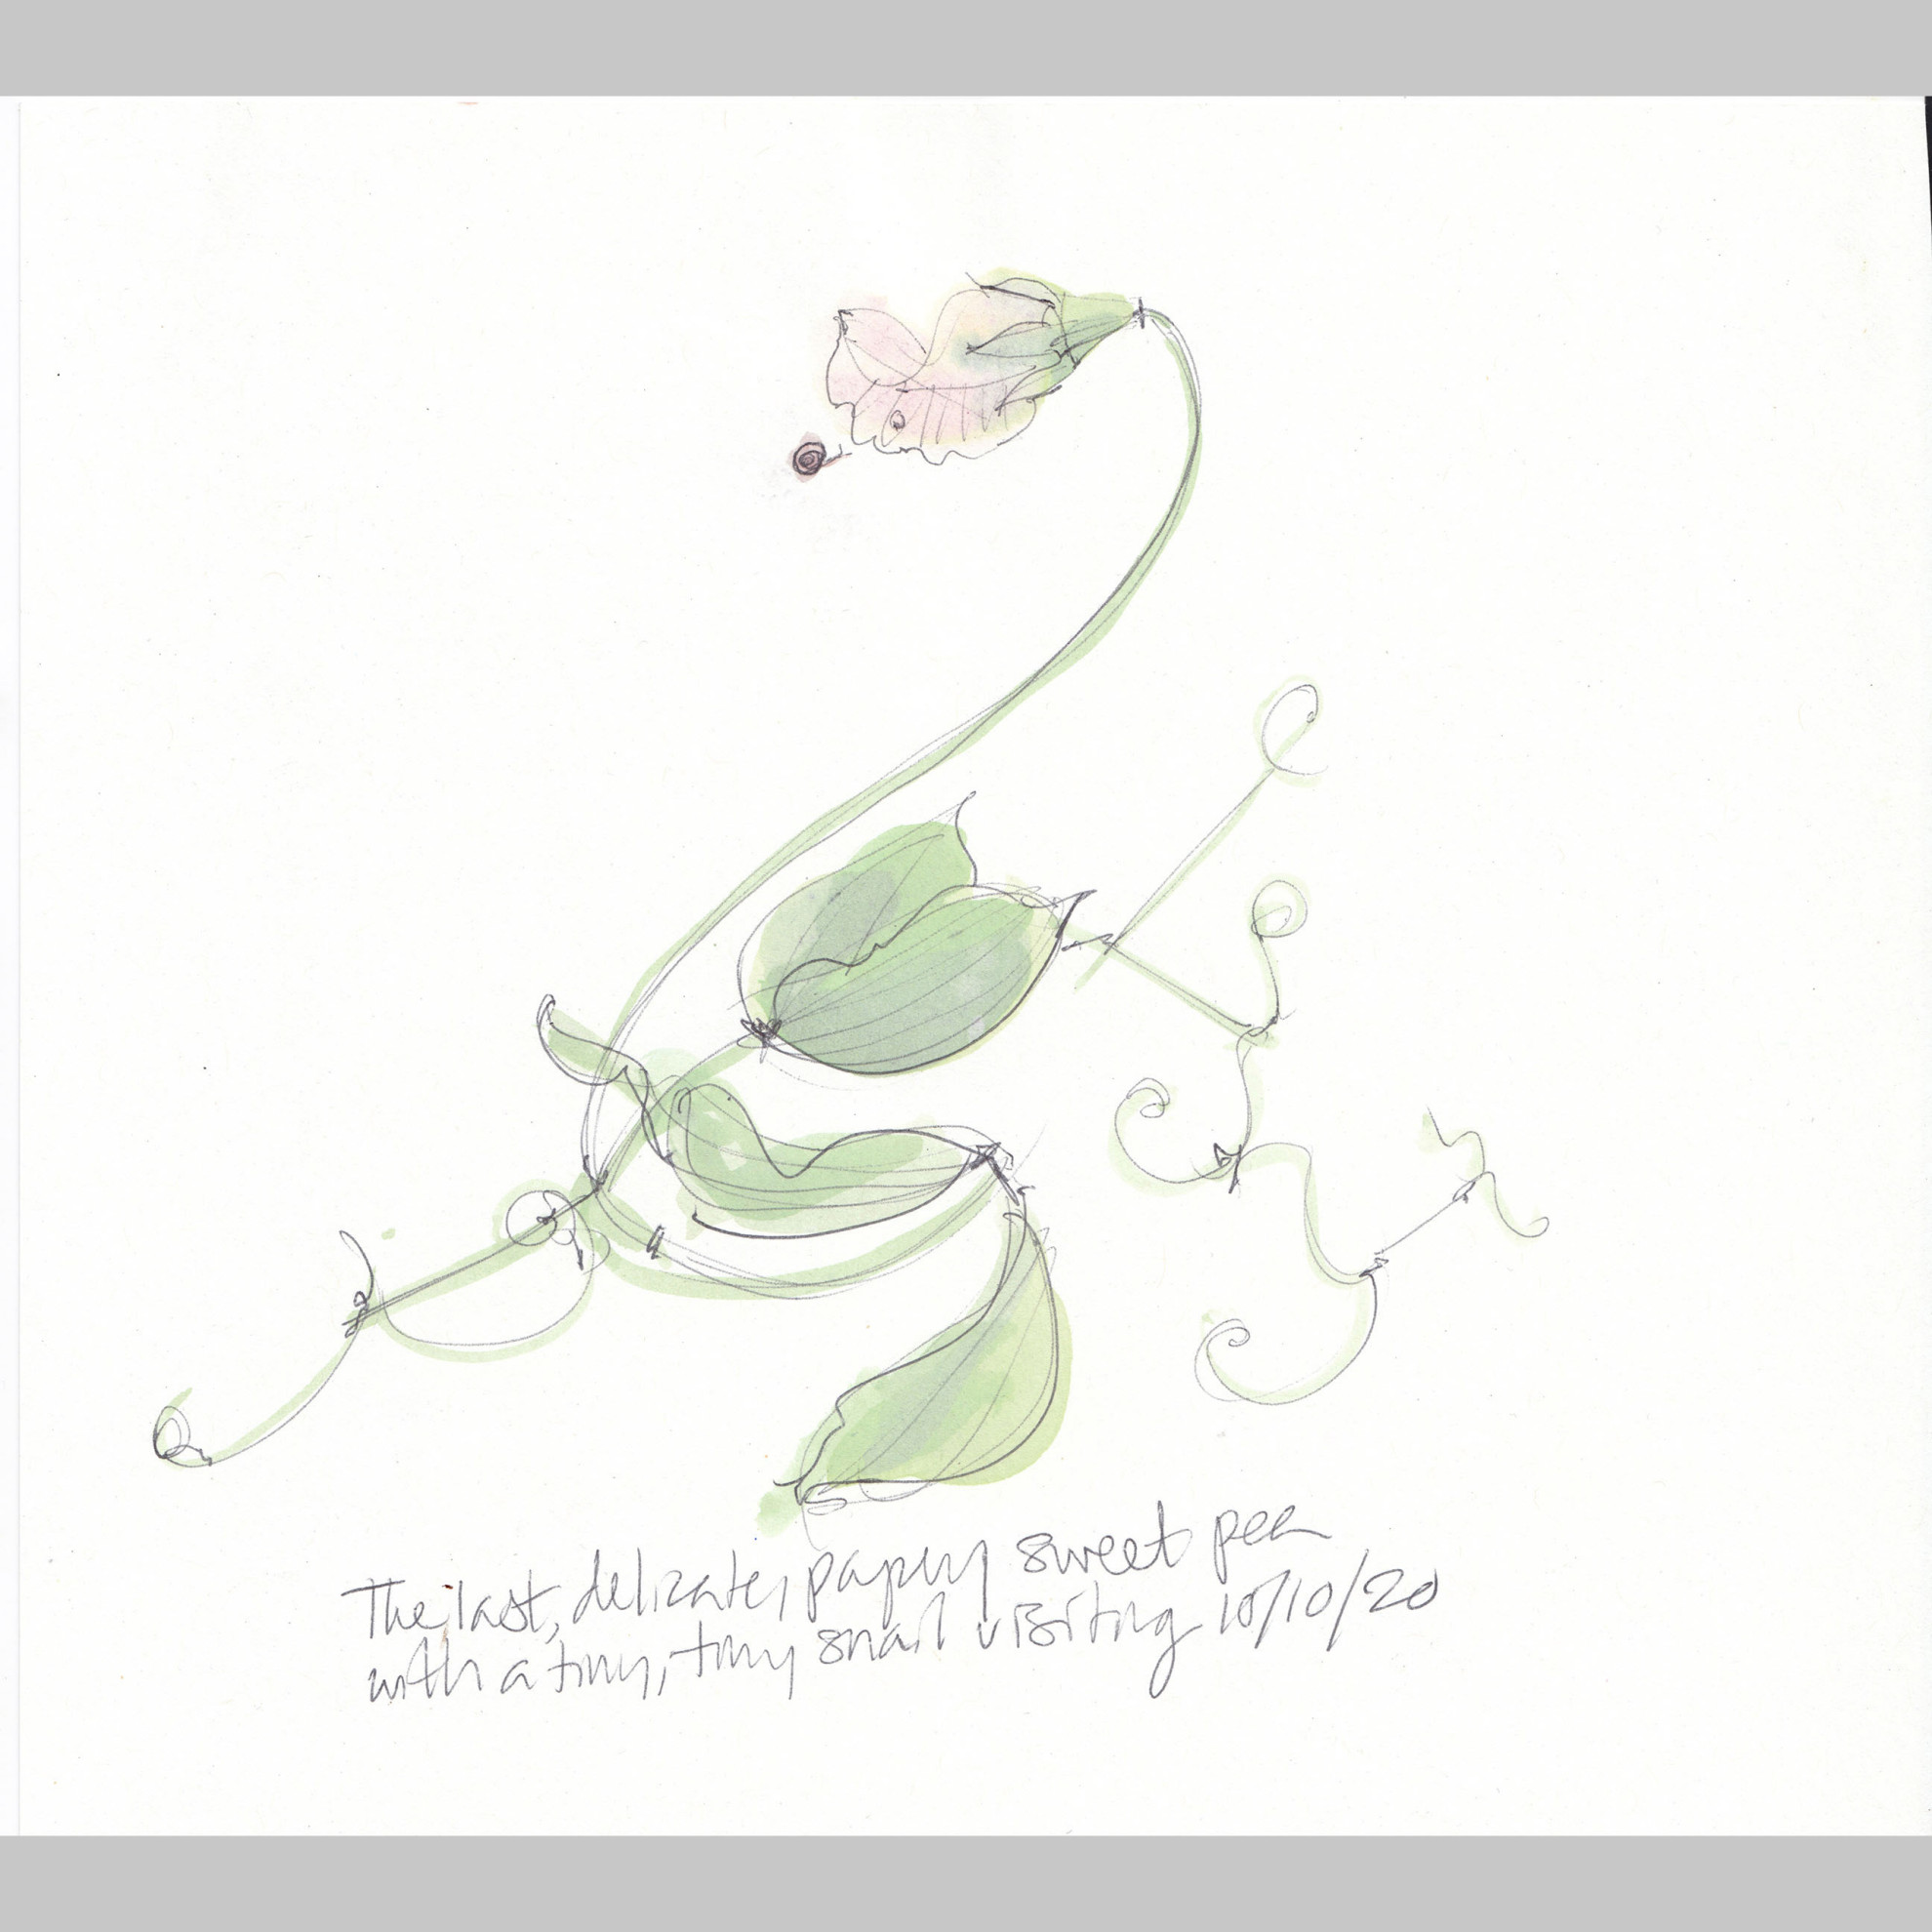 Last sweet pea, tiny snail 10.10.20 (An original sketch by Lydia Thornley)